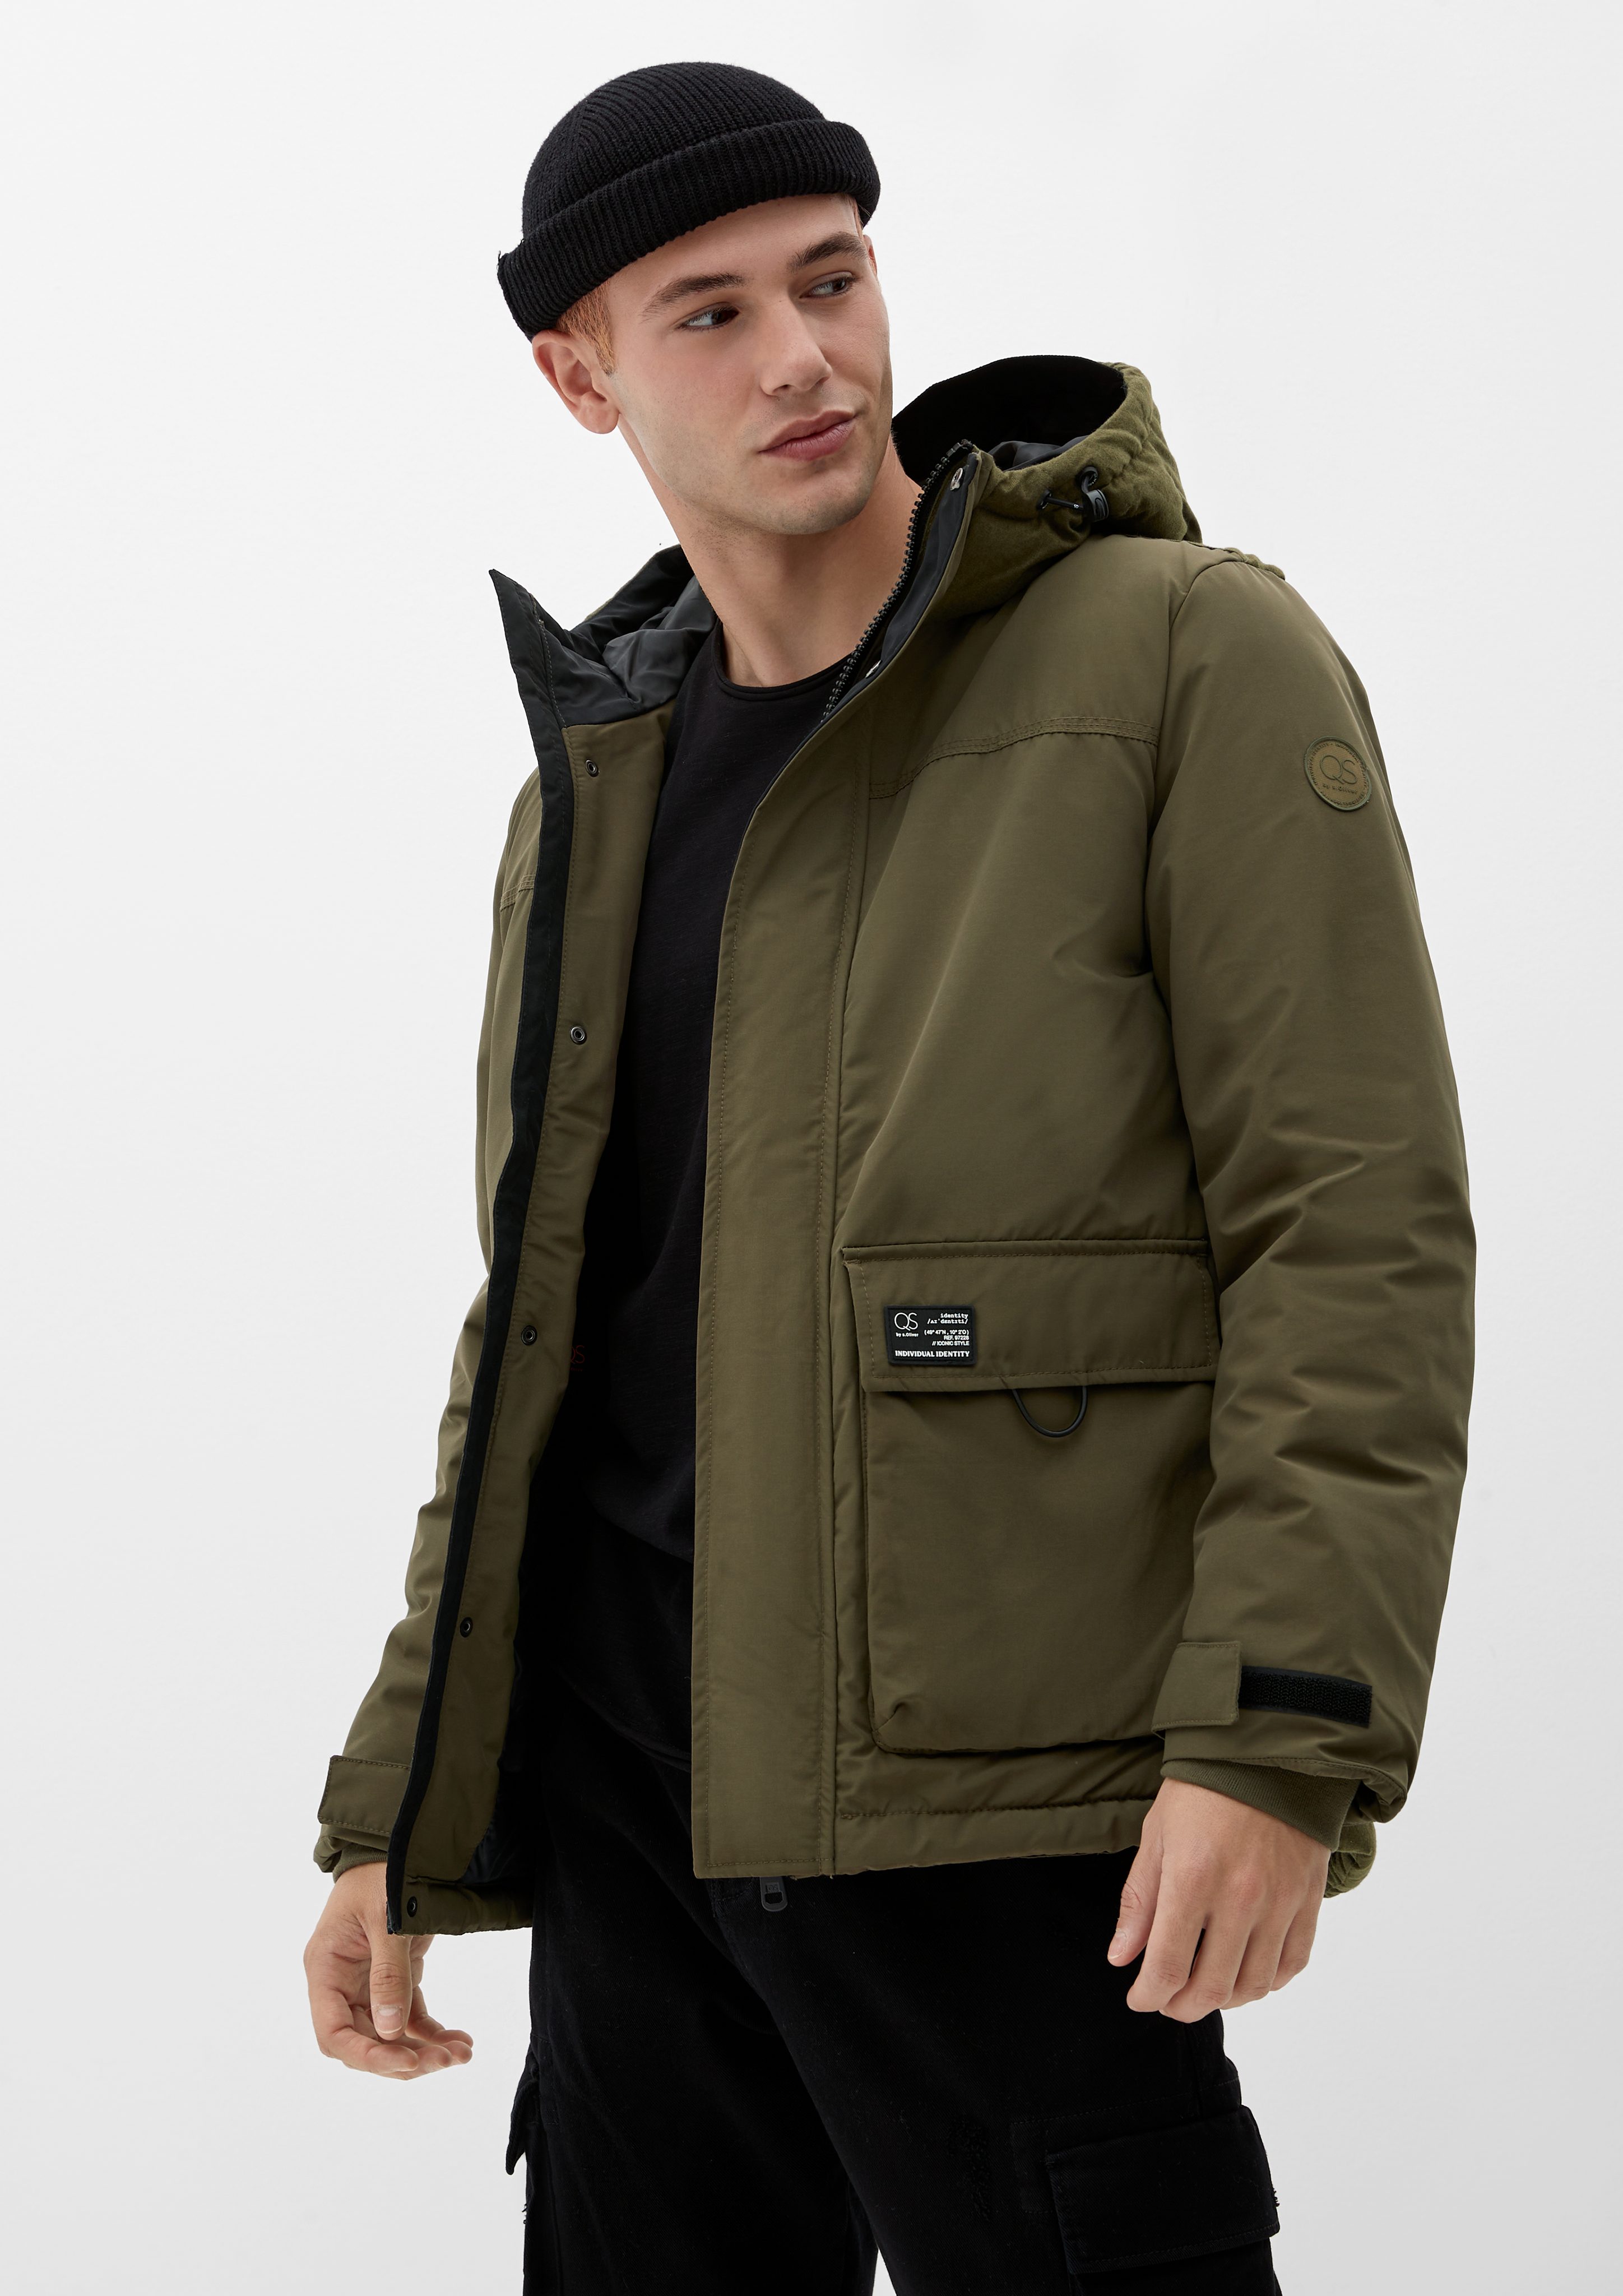 Allwetterjacke mit forest Label-Patch night QS Steppdetail Parka